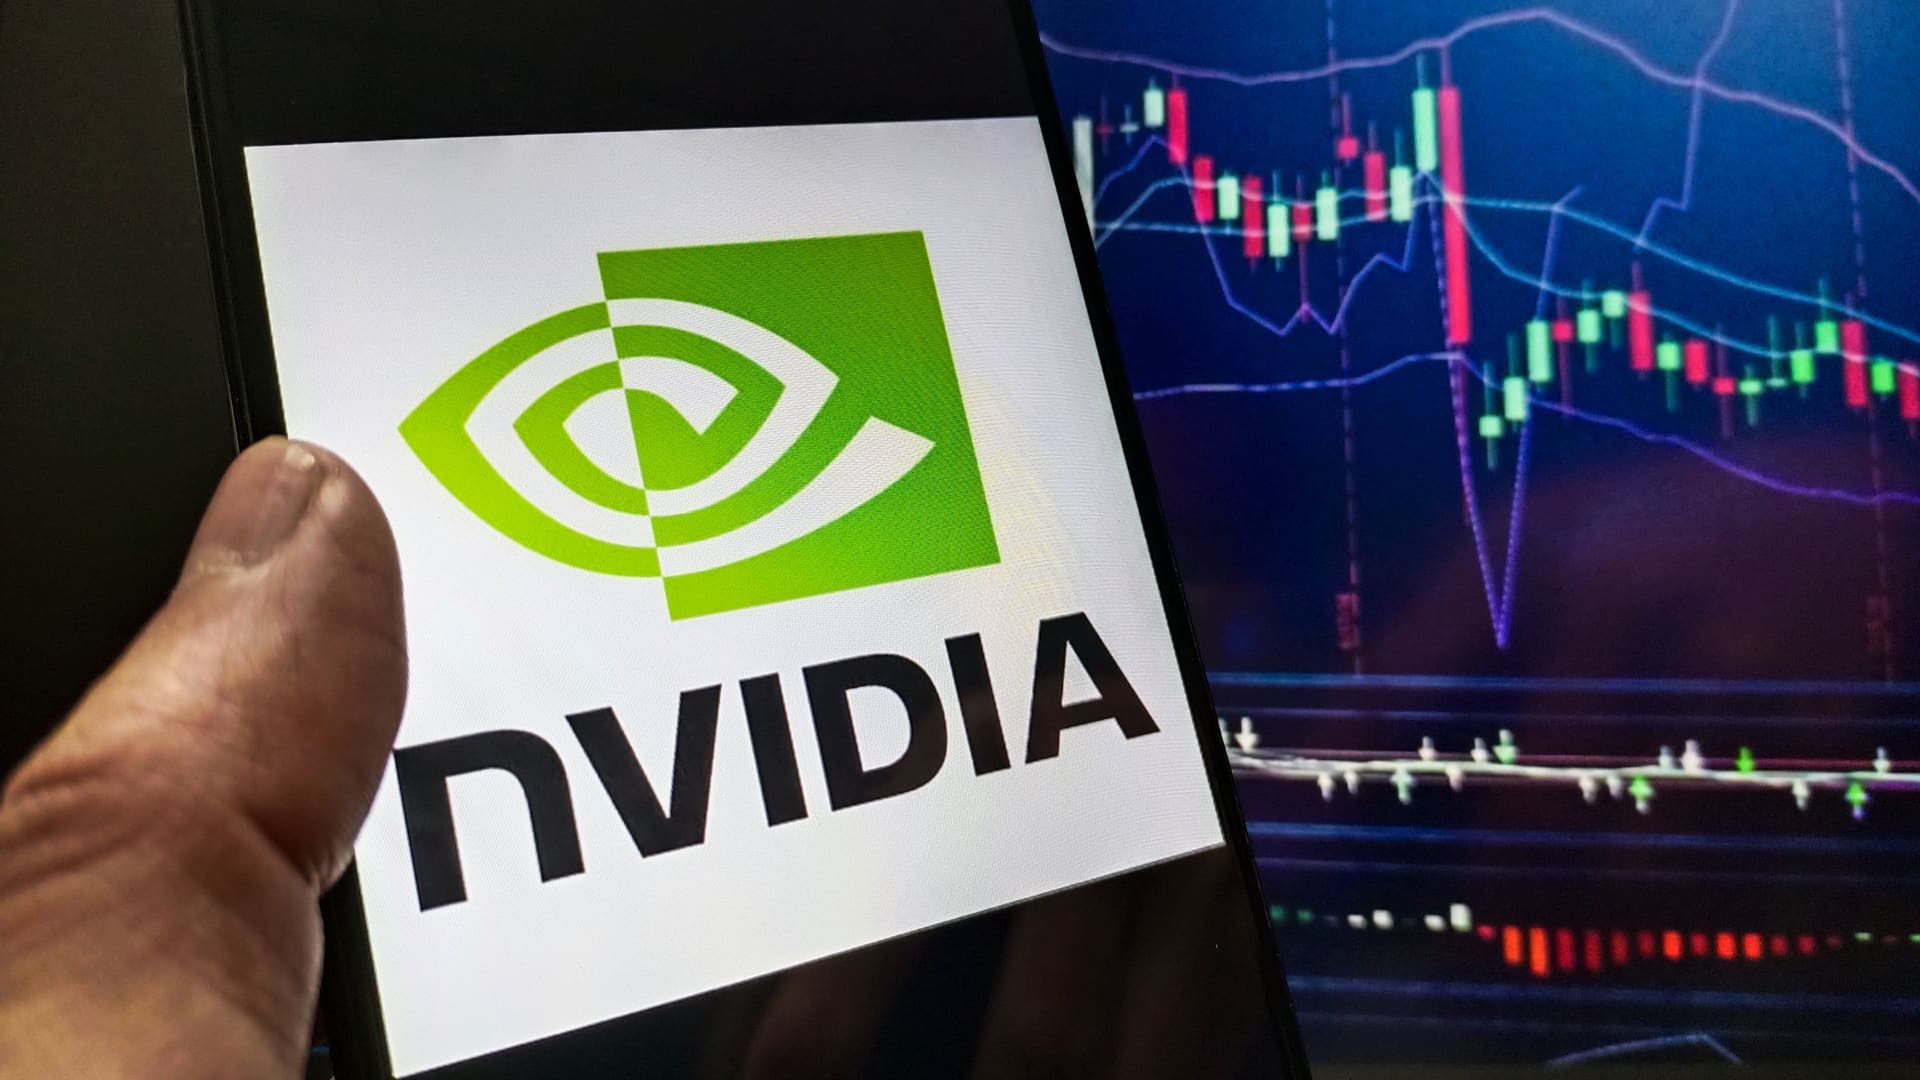 In this article are the 6 shares that rise when Nvidia shares drop